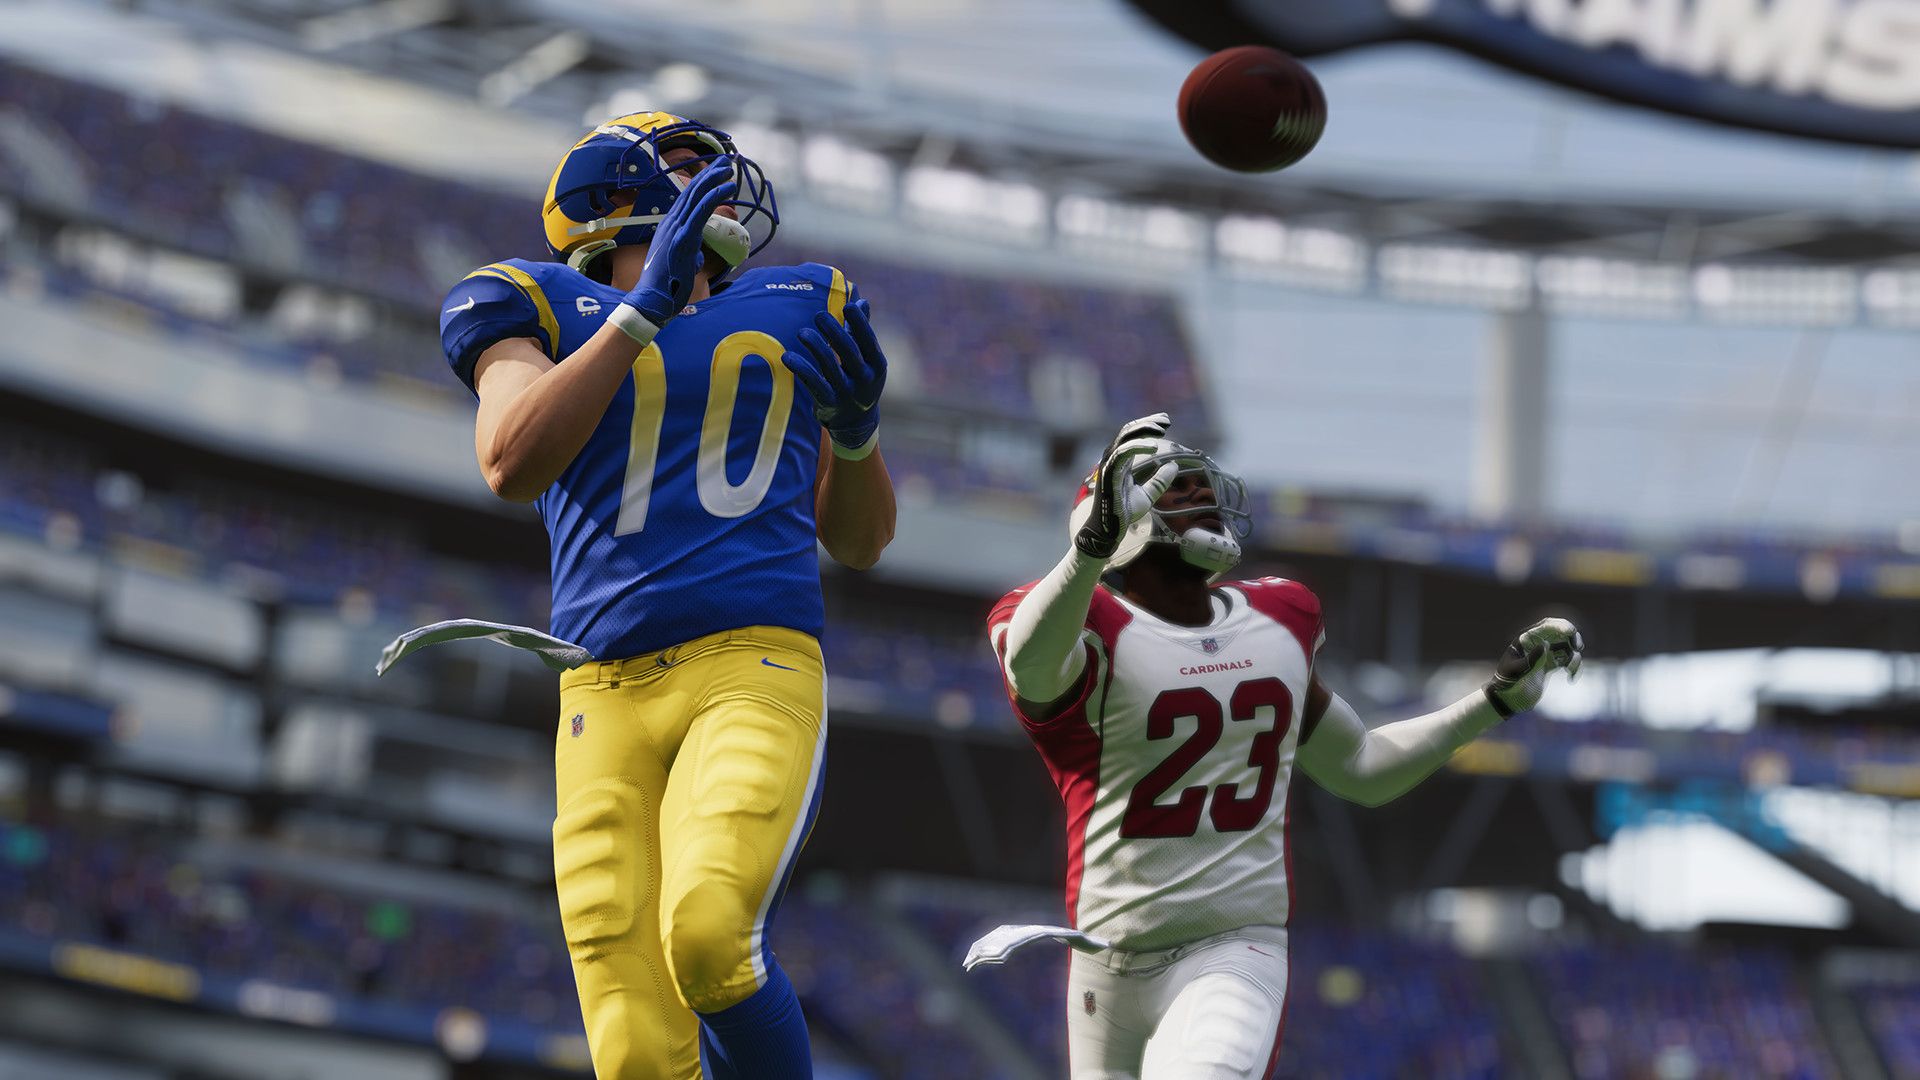 If you are looking to learn the best players, and top card ratings for Ultimate Team at launch, our Madden 23 MUT database guide has got you covered.